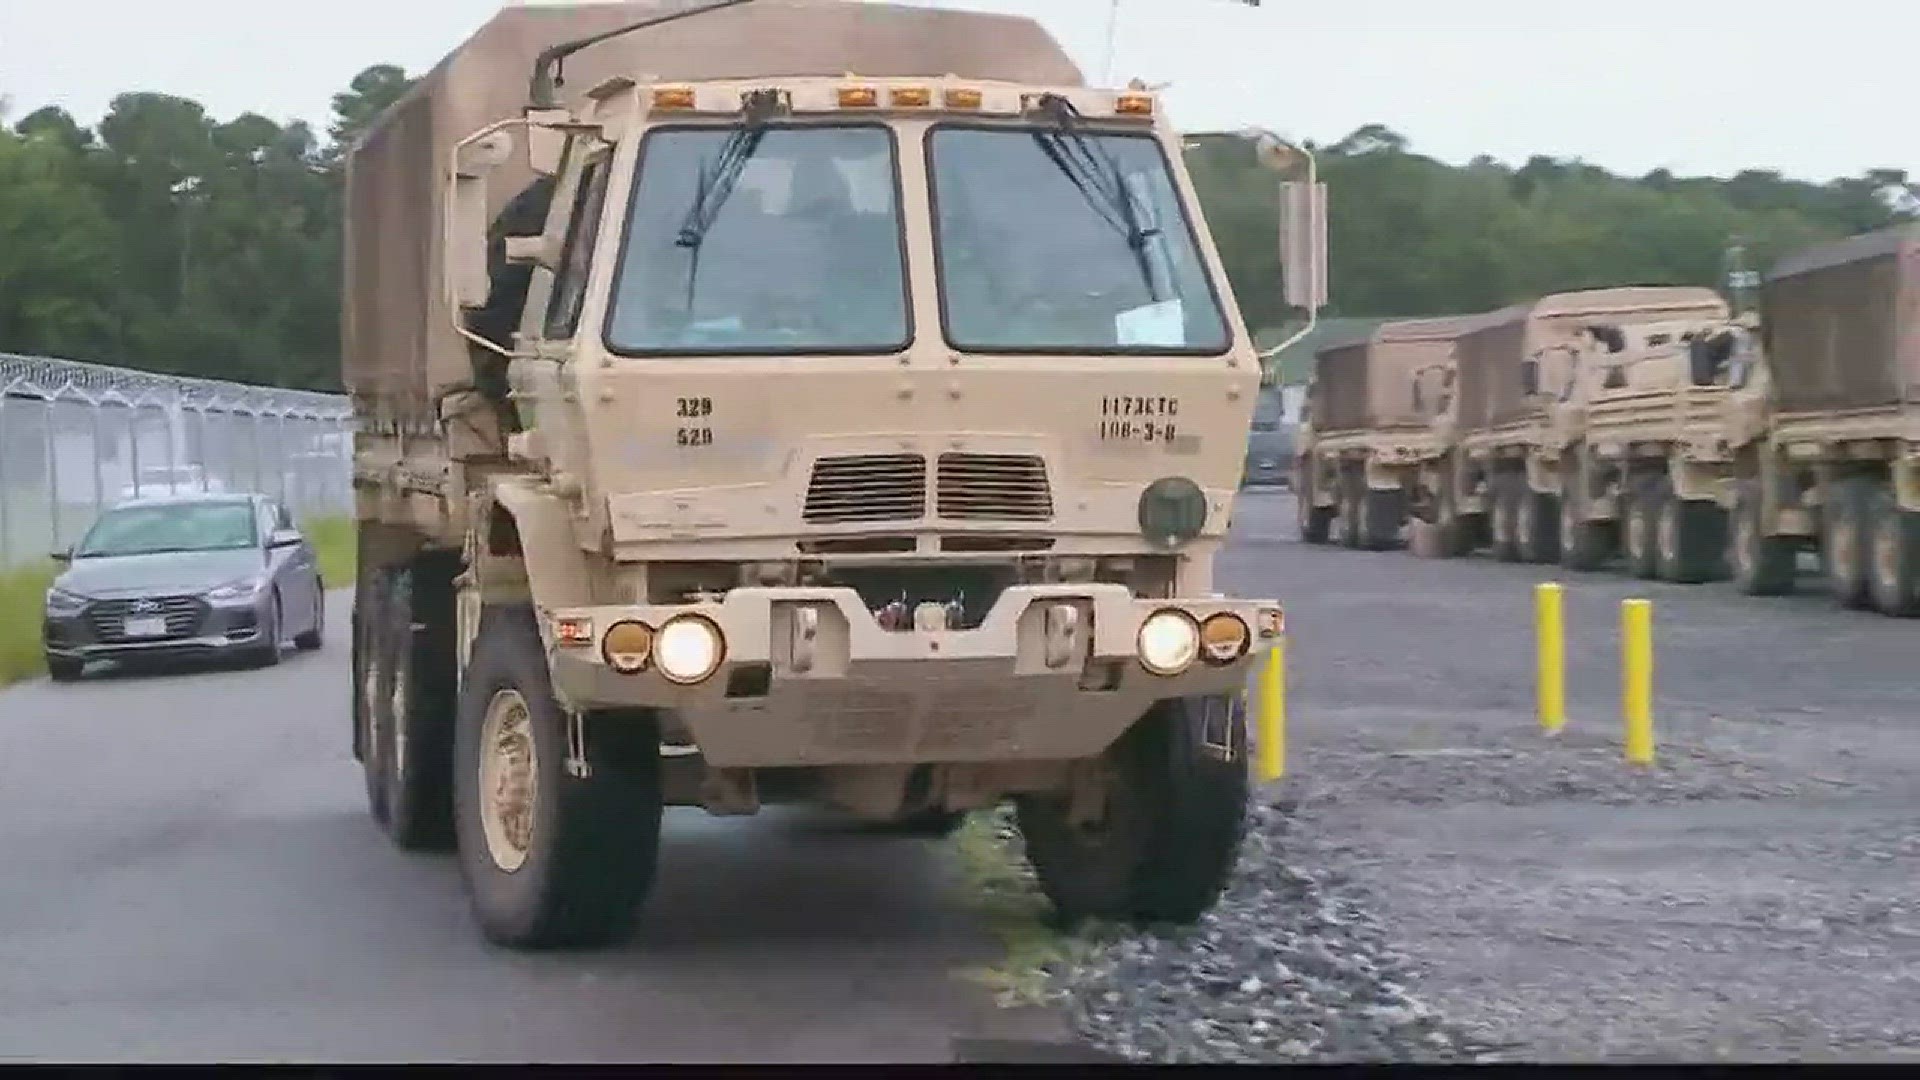 Virginia seemingly dodged a bullet with Hurricane Florence, but the National Guard is still on standby right now to help here in the Commonwealth and in other states.